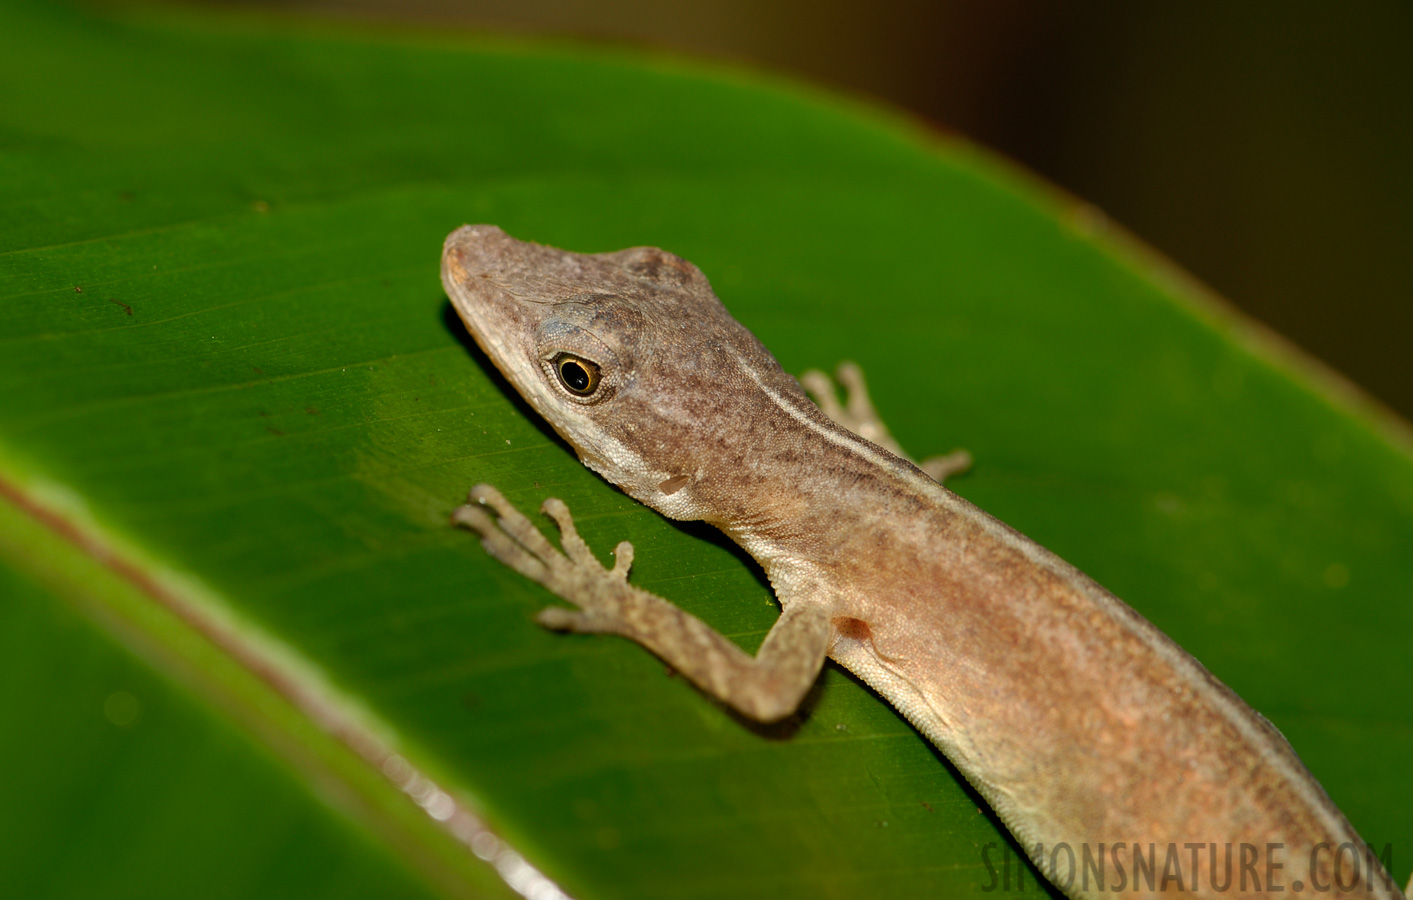 Anolis limifrons [105 mm, 1/60 Sek. bei f / 10, ISO 100]